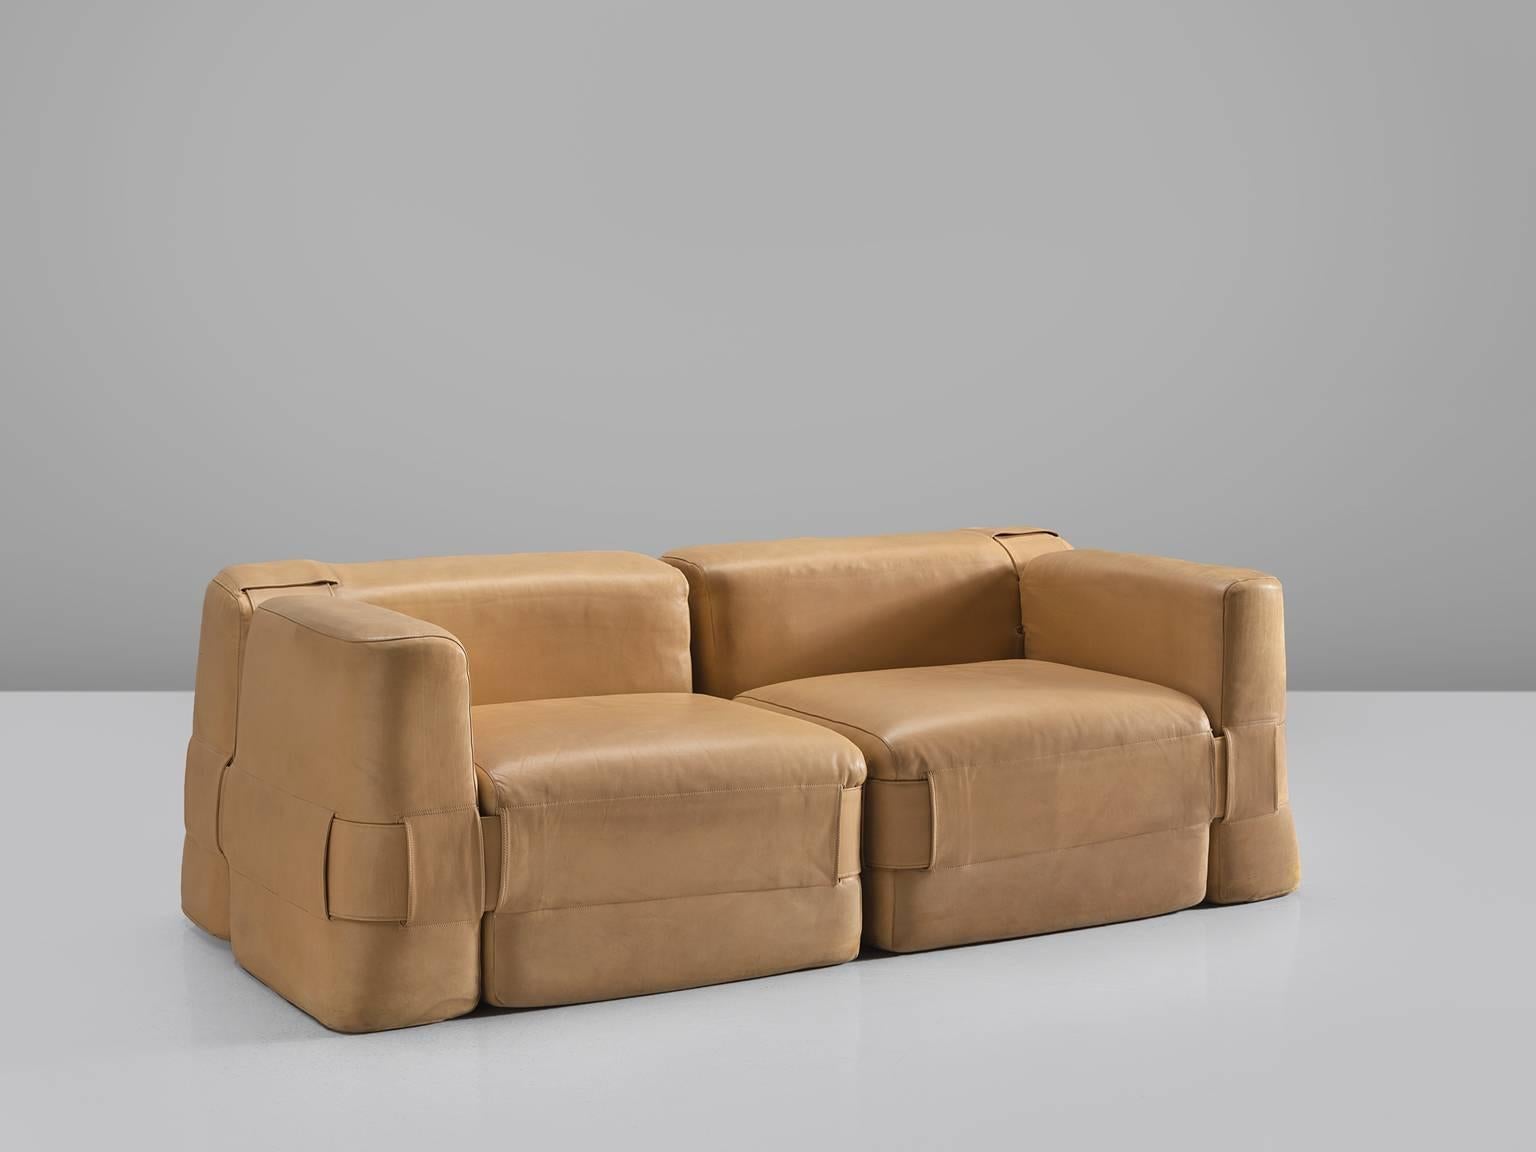 Mario Bellini for Cassina, sofa model 932, cognac leather, Italy, 1964

Mario Bellini designed this modular sofa for Cassina. The sofa is a reinterpretation of classic furniture that always uses padded cushions. He experimented with these cushions